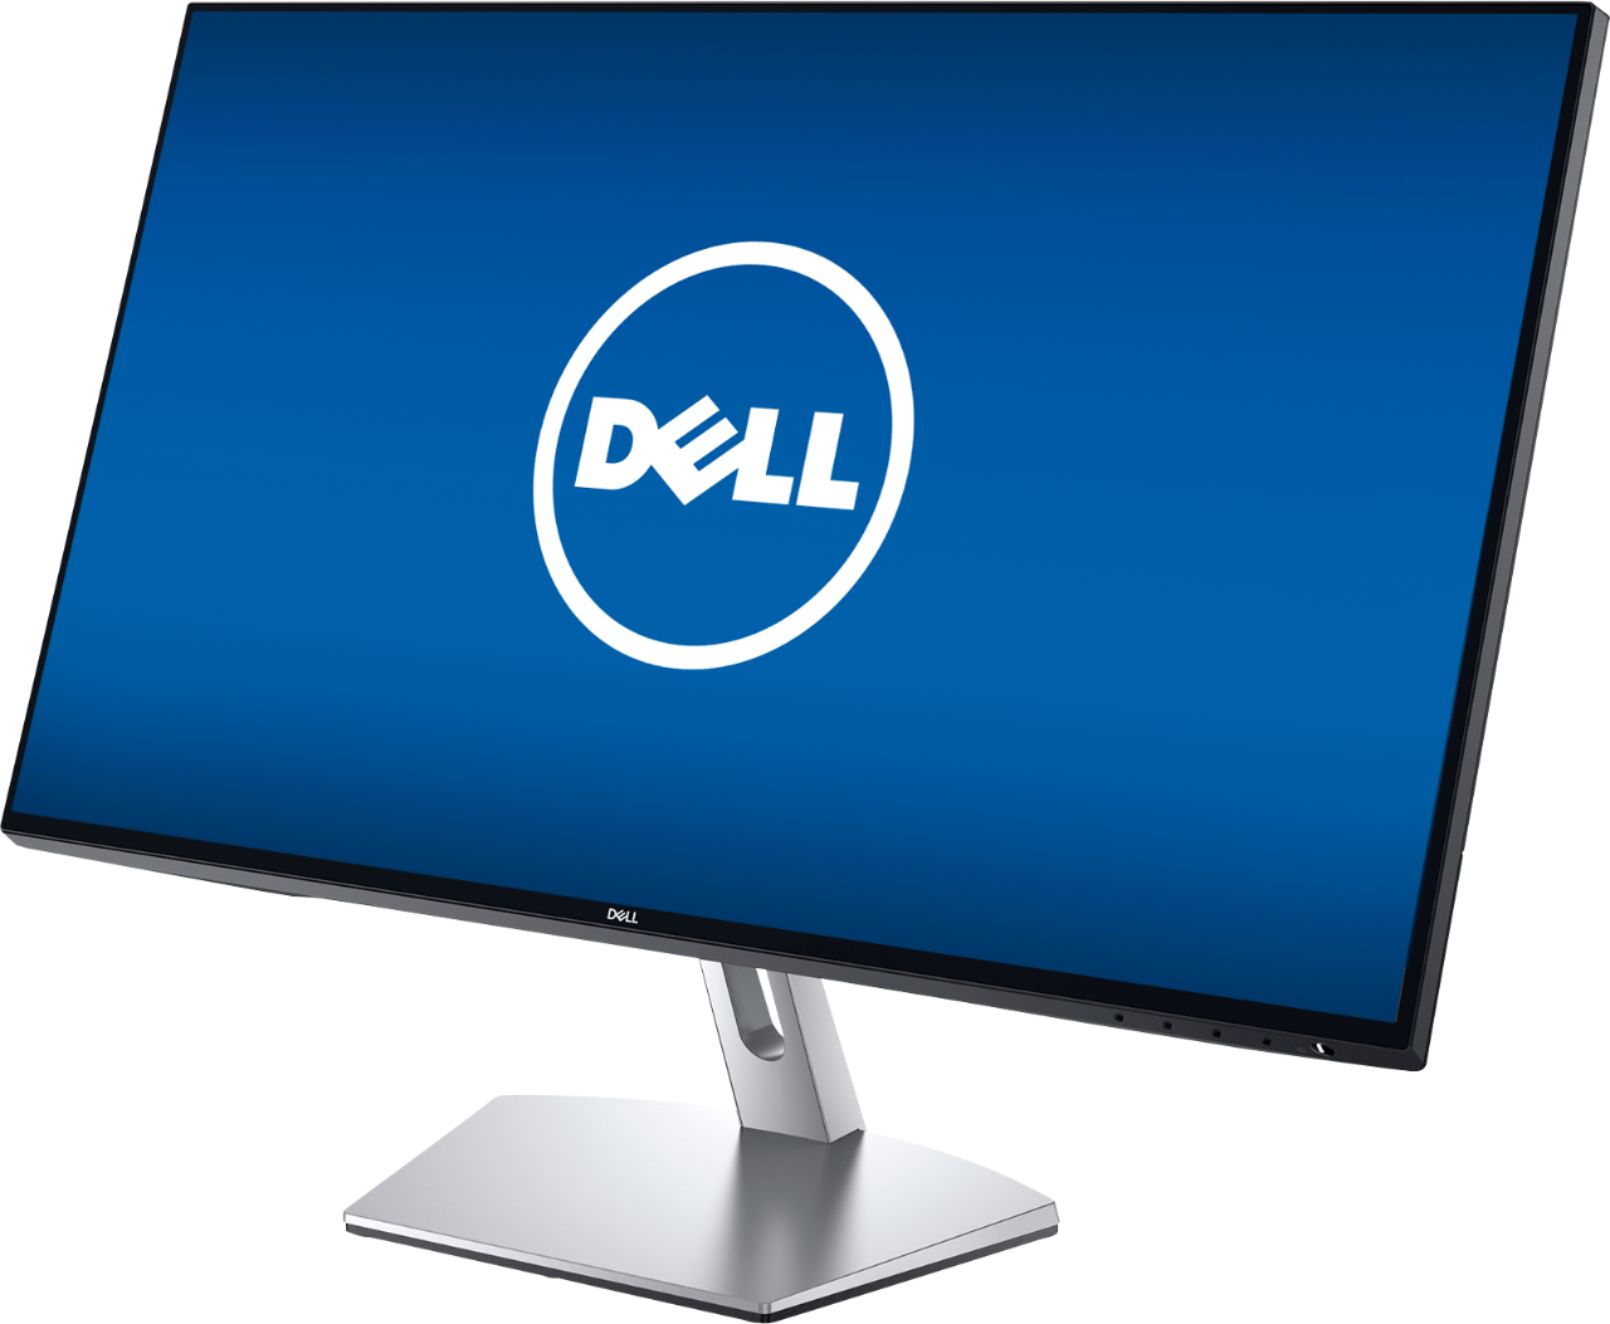 codes sale Dell “27 Home Full HD Monitor 27 for inch Sale Microphones ...